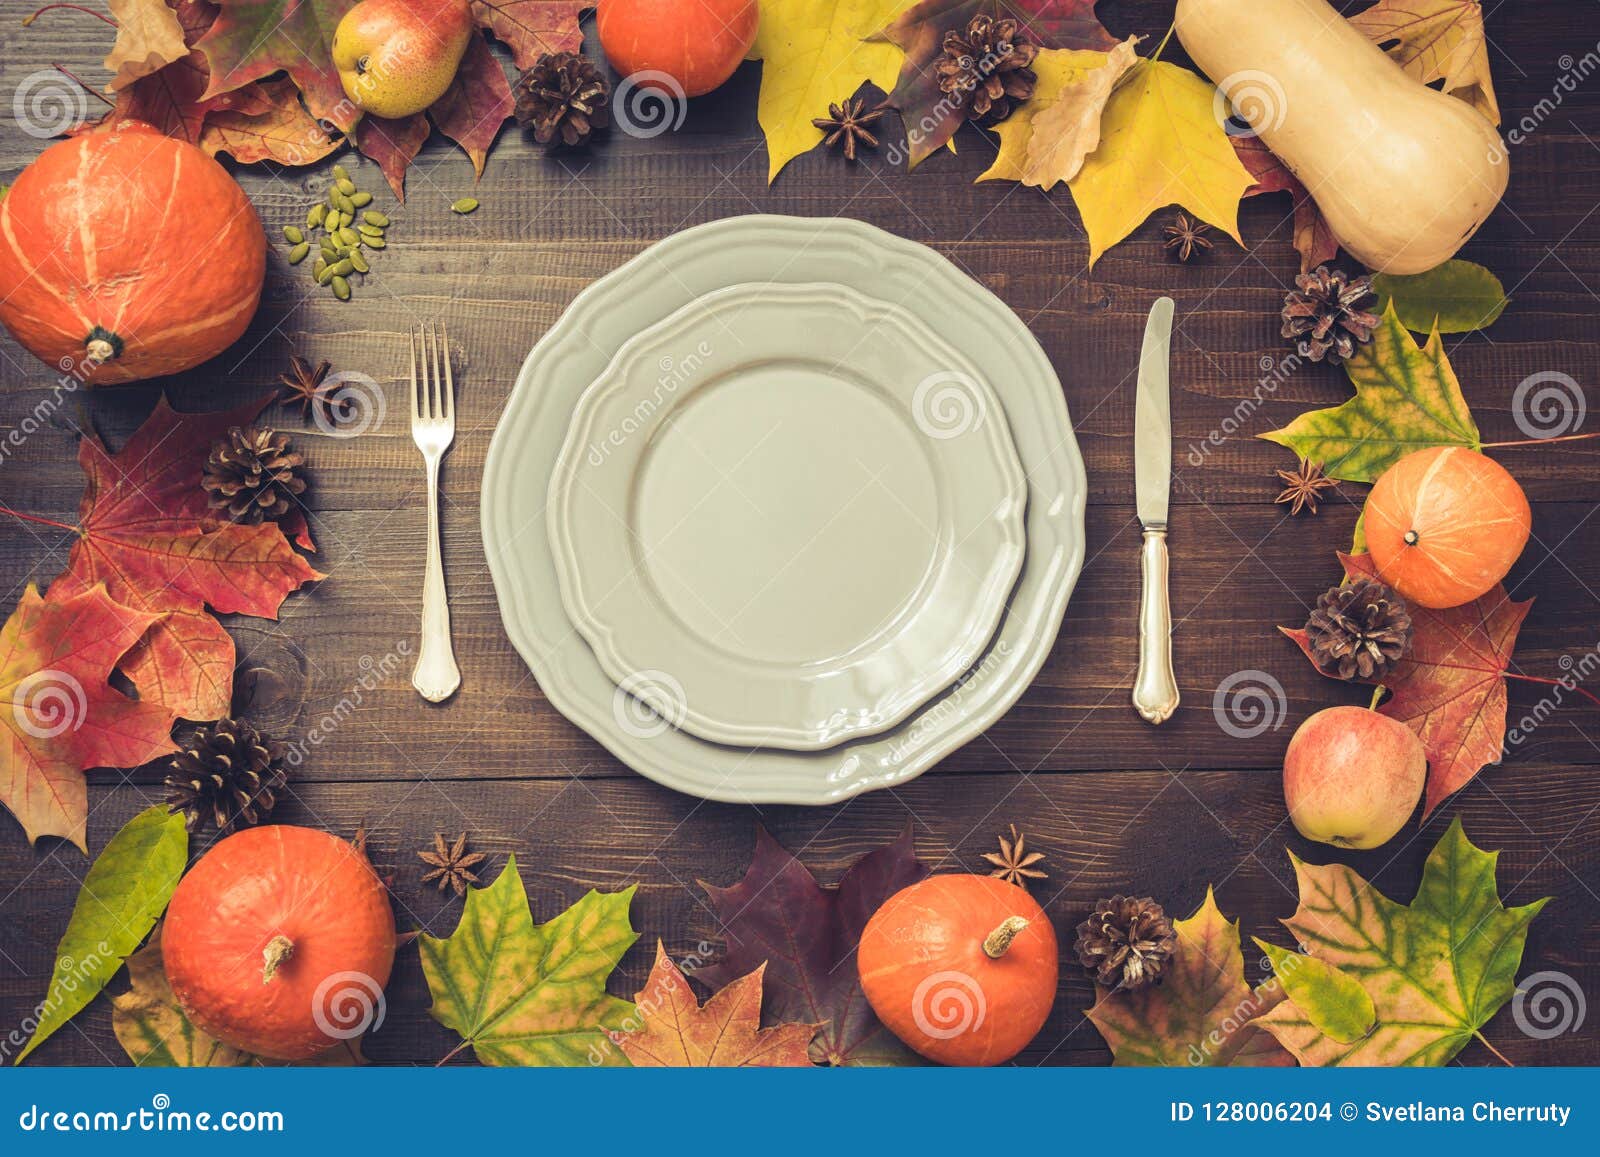 Autumn and Thanksgiving Day Table Setting with Fallen Leaves, Pumpkins ...